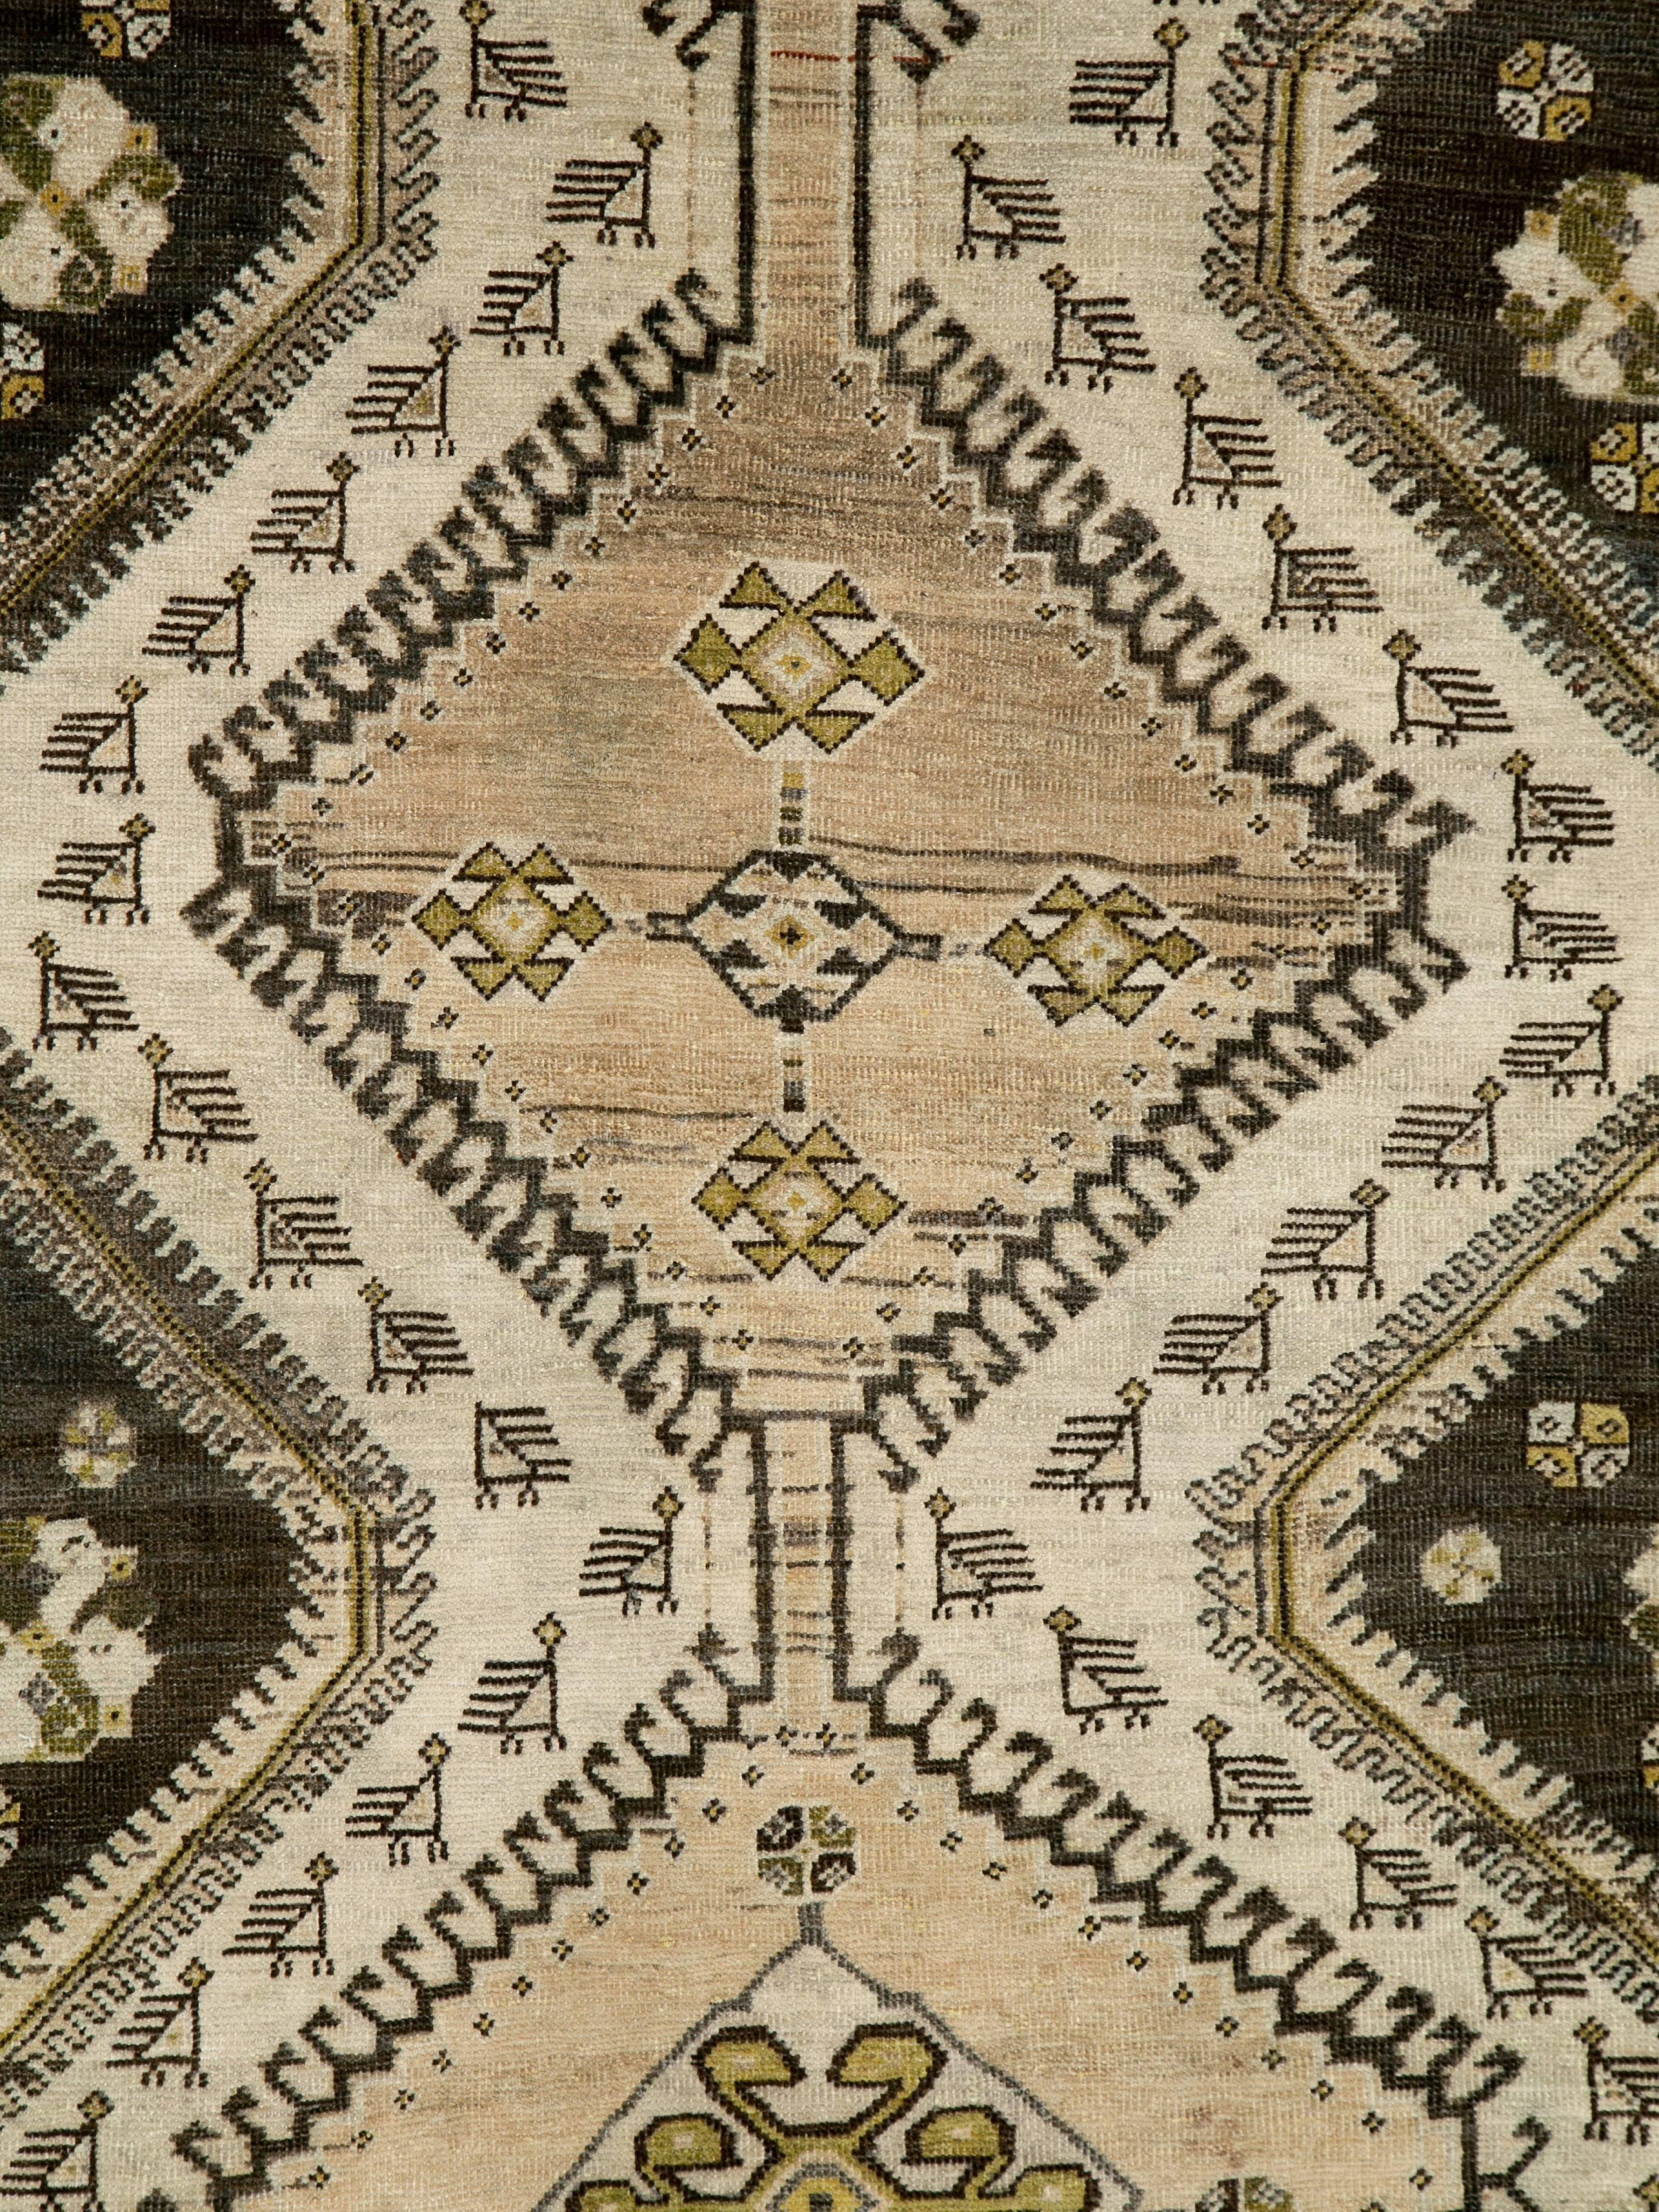 A Persian Malayer rug from the first quart of the 20th century.